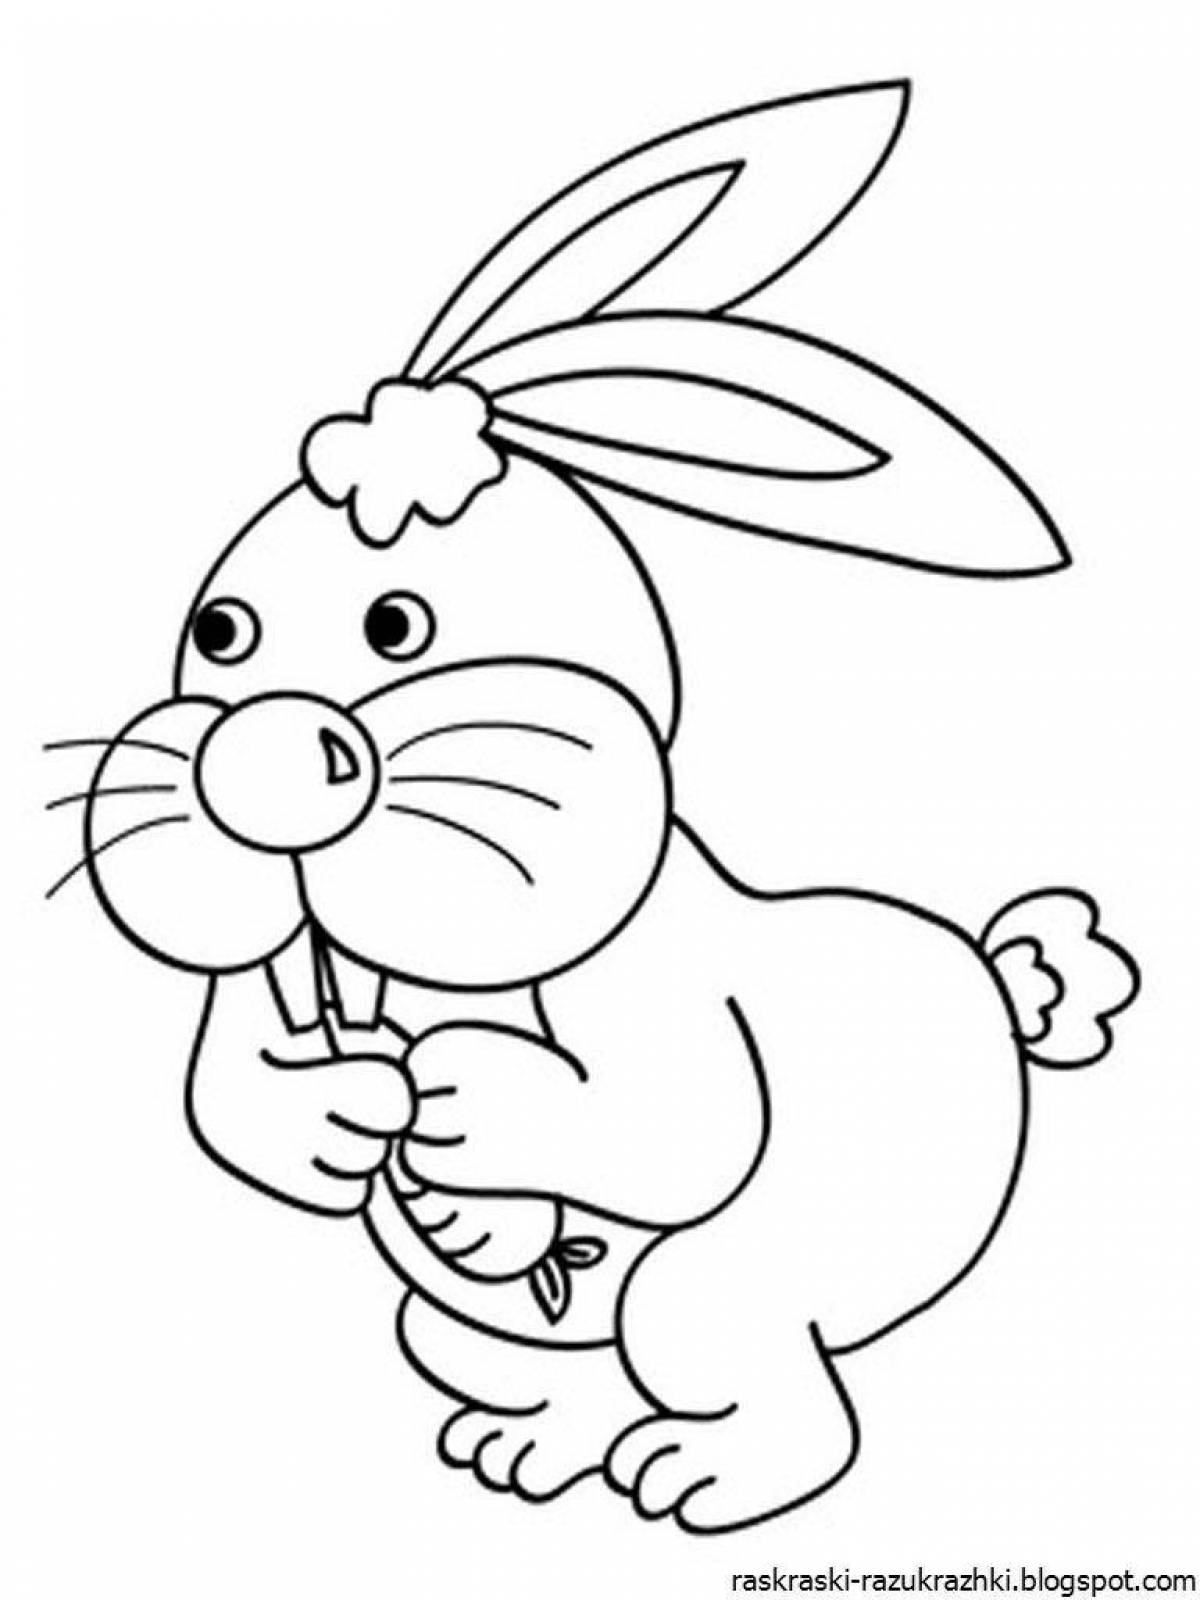 Coloring book cheerful rabbit with carrots